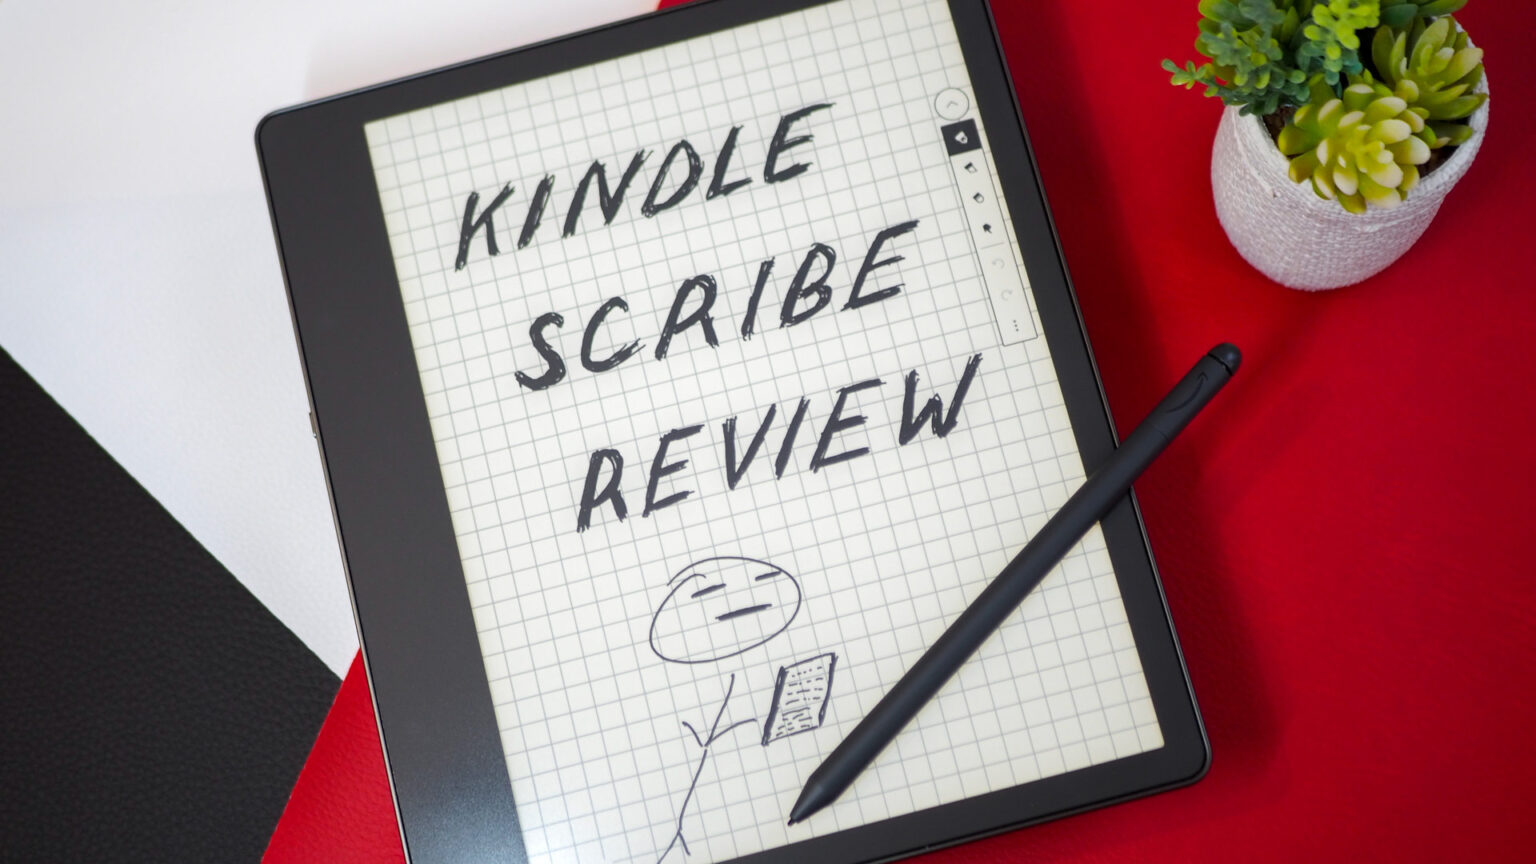 Amazon Kindle Scribe review Remarkable or just noteworthy?